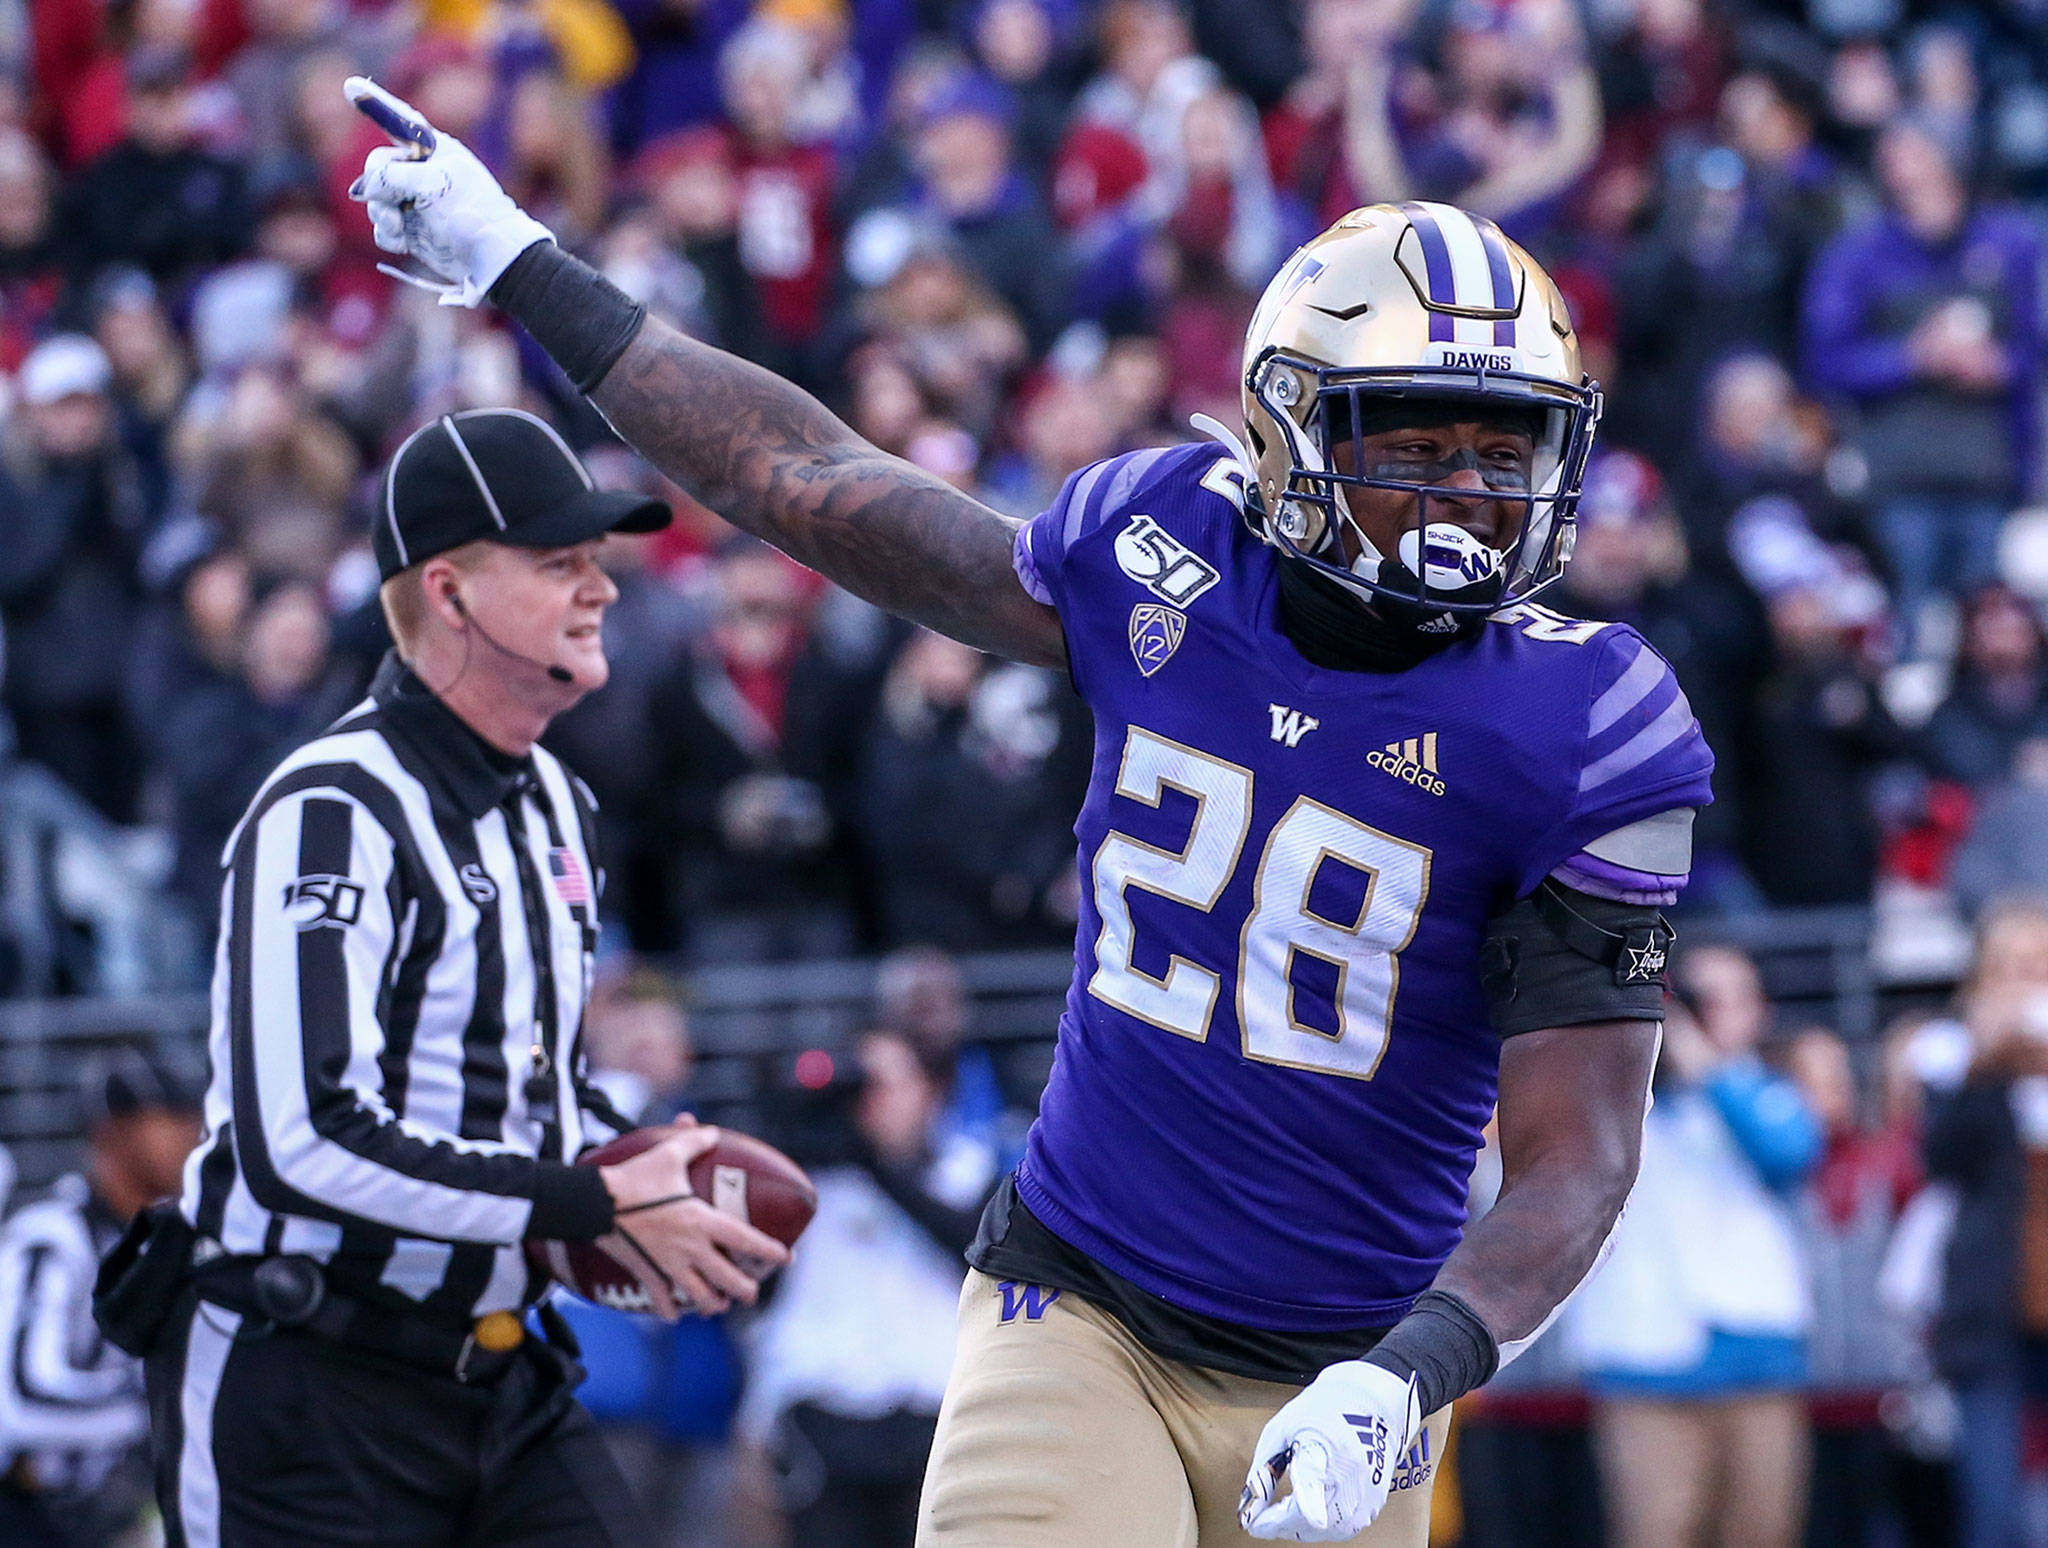 Washington running back Richard Newton (28) celebrates his touchdown during the 112th Apple Cup against Washington State on Nov. 29, 2019, at Husky Stadium in Seattle. (Kevin Clark / The Herald)